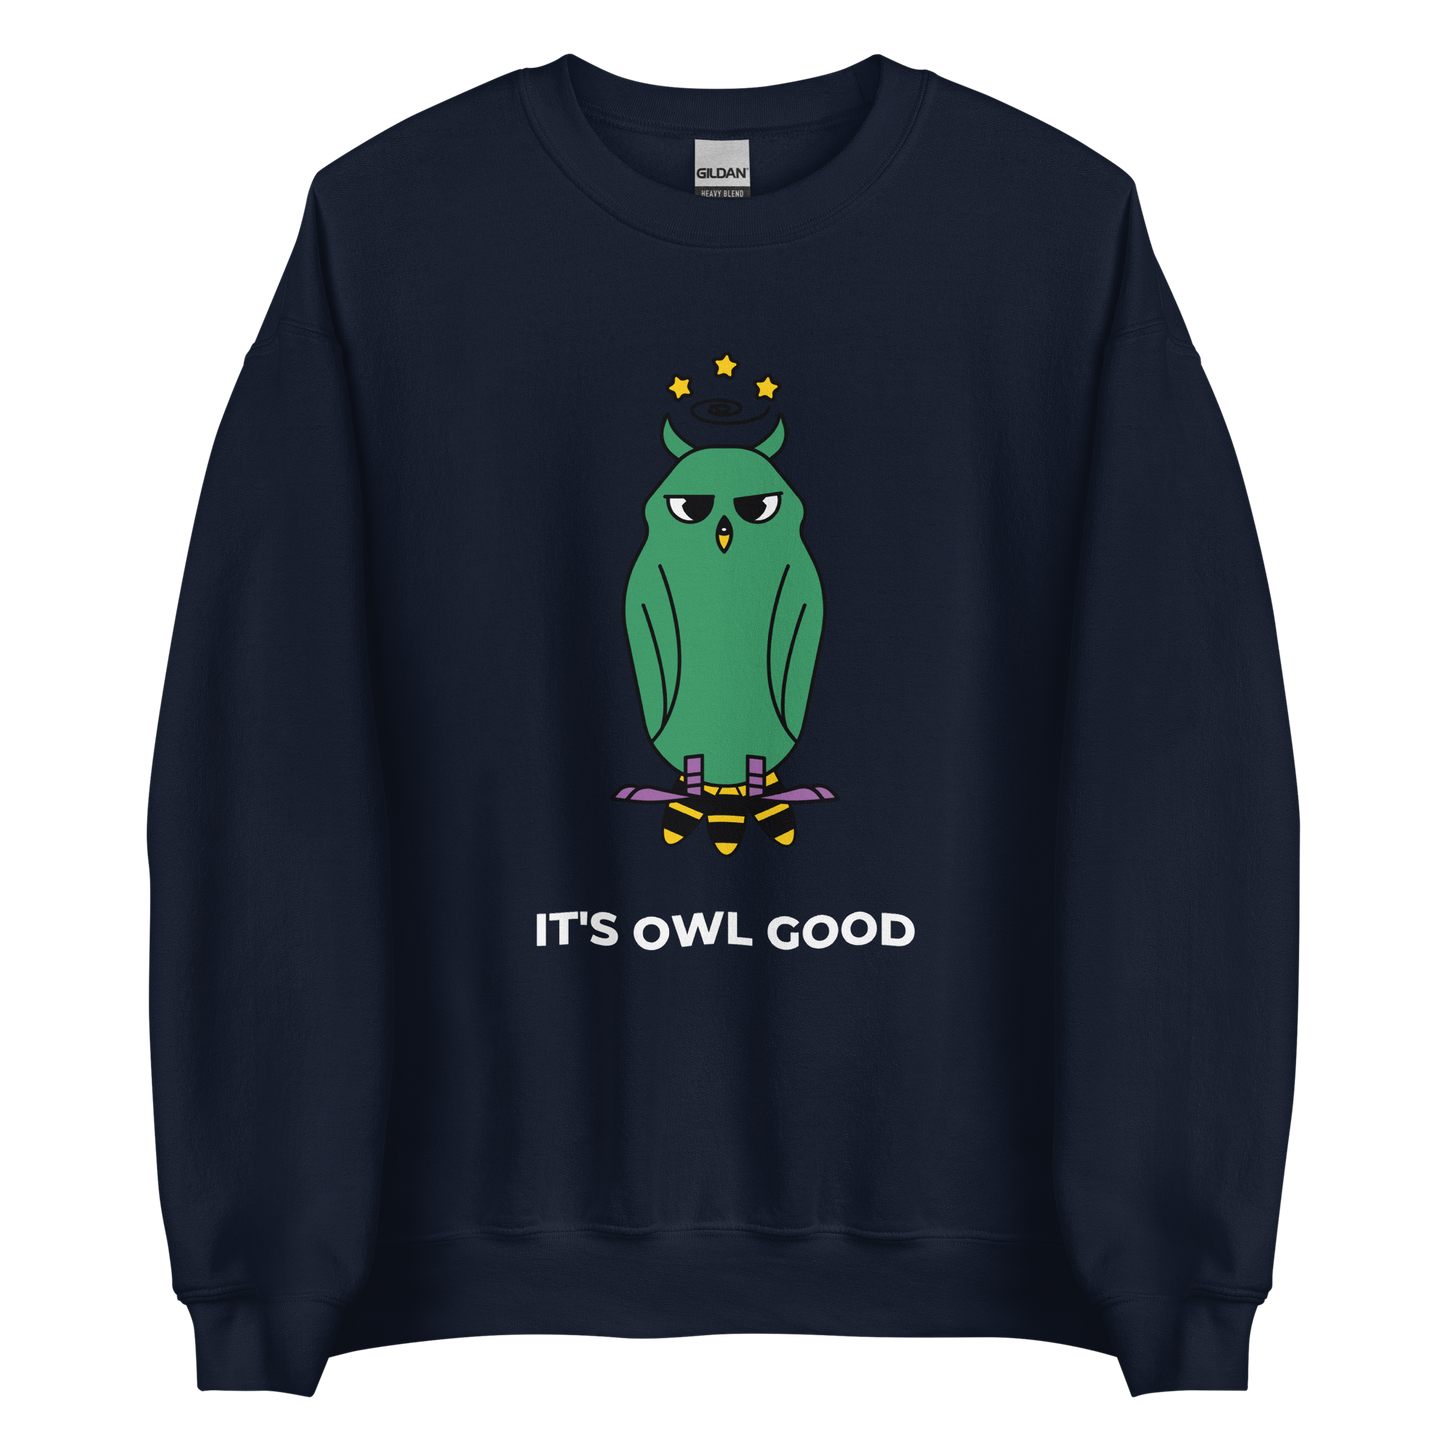 Navy Owl Sweatshirt featuring a captivating It's Owl Good graphic on the chest - Funny Graphic Owl Sweatshirts - Boozy Fox